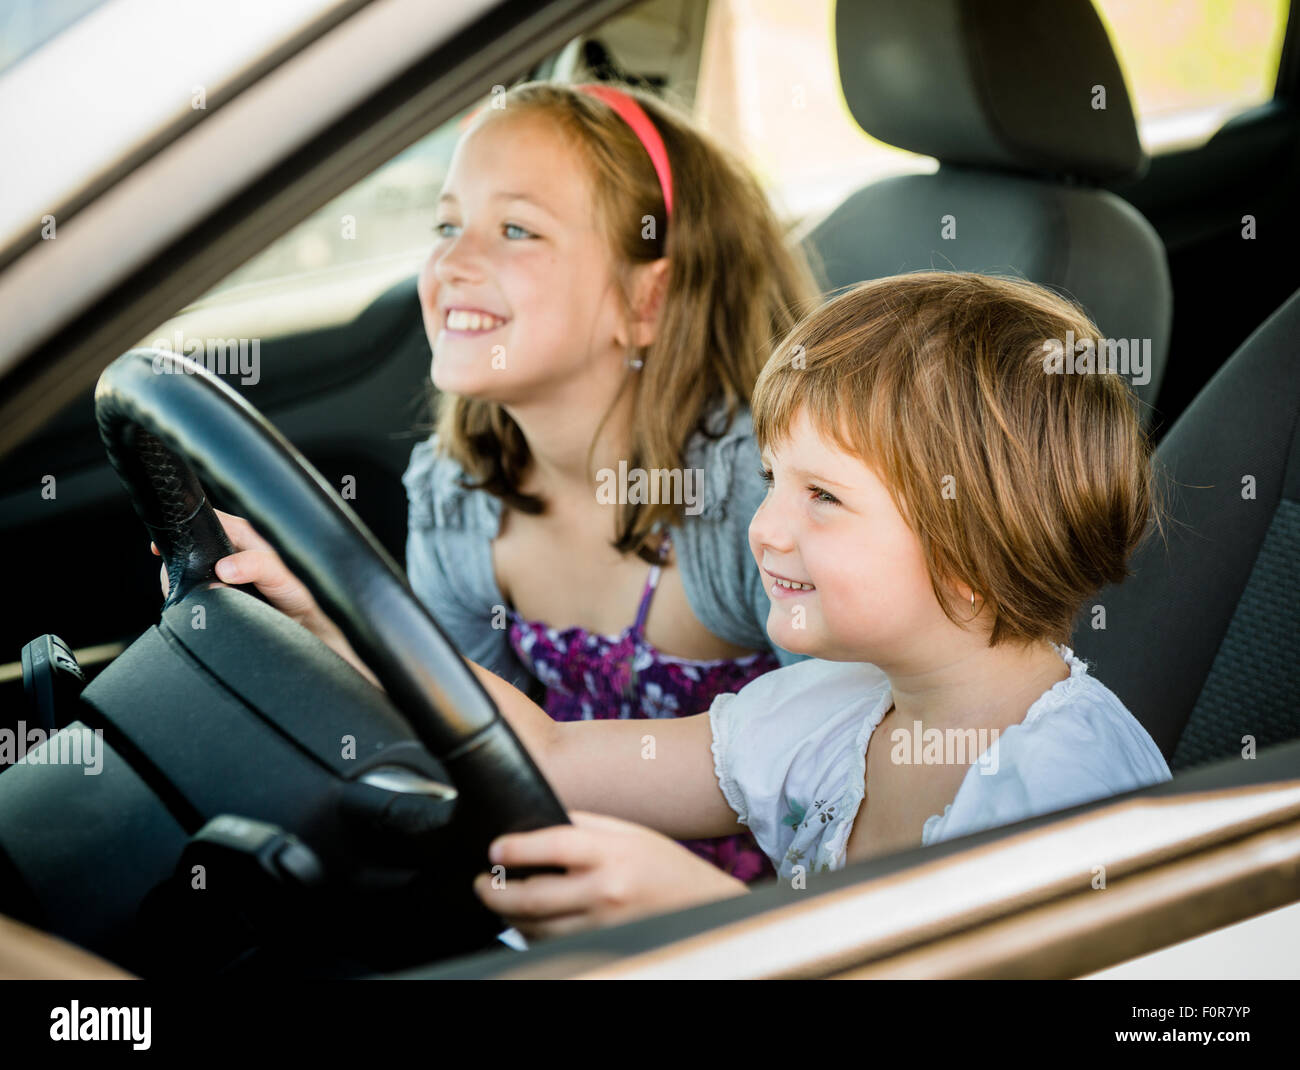 Children pretend driving car sitting on front vehicle seats Stock Photo